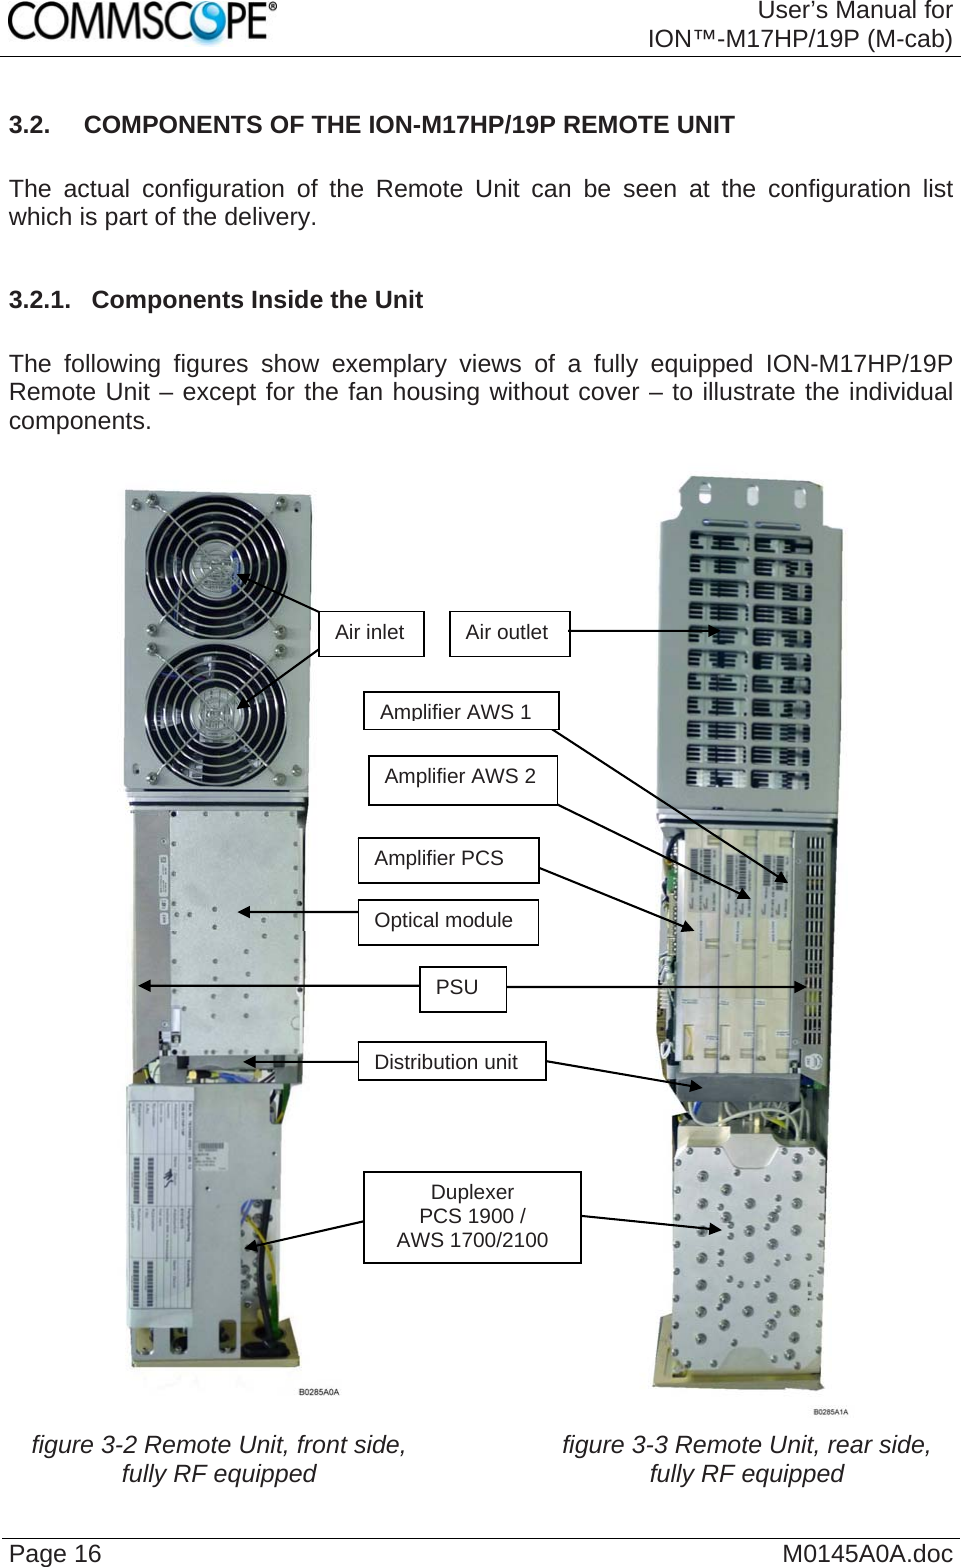  User’s Manual forION™-M17HP/19P (M-cab) Page 16  M0145A0A.doc3.2.  COMPONENTS OF THE ION-M17HP/19P REMOTE UNIT   The actual configuration of the Remote Unit can be seen at the configuration list which is part of the delivery.  3.2.1.  Components Inside the Unit  The following figures show exemplary views of a fully equipped ION-M17HP/19P Remote Unit – except for the fan housing without cover – to illustrate the individual components.     figure 3-2 Remote Unit, front side, fully RF equipped    figure 3-3 Remote Unit, rear side, fully RF equipped Air inlet  Air outlet PSU Distribution unitOptical module Amplifier AWS 2 Amplifier AWS 1Amplifier PCS Duplexer PCS 1900 / AWS 1700/2100 